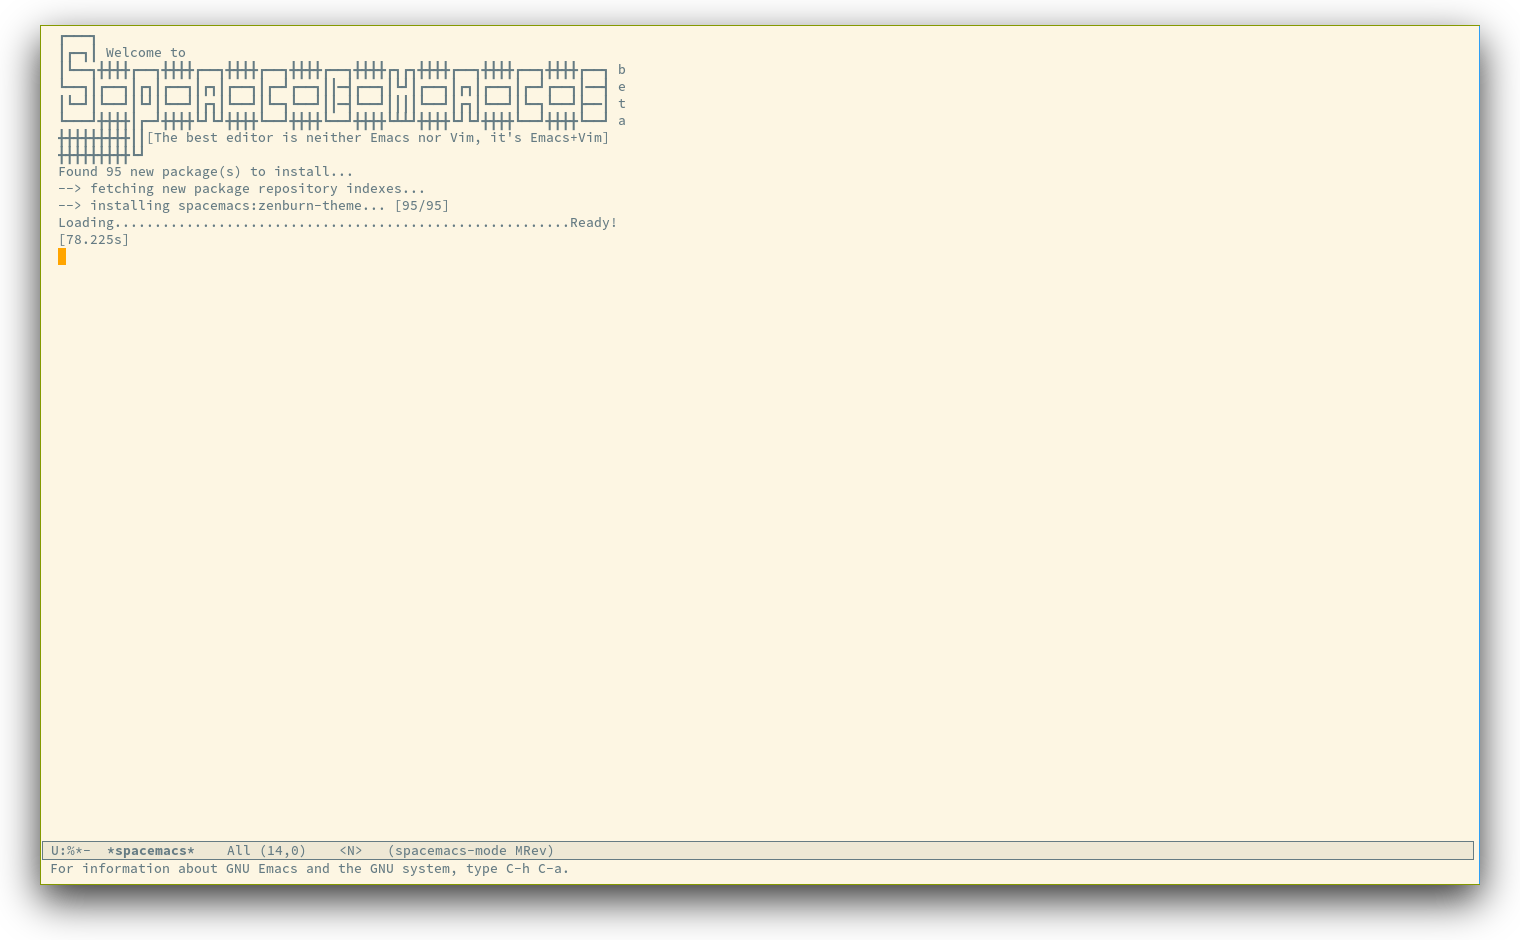 /TakeV/spacemacs/media/commit/91947406f8901c19a38db174f3704c5d66bf6de1/doc/img/spacemacs-startup.png